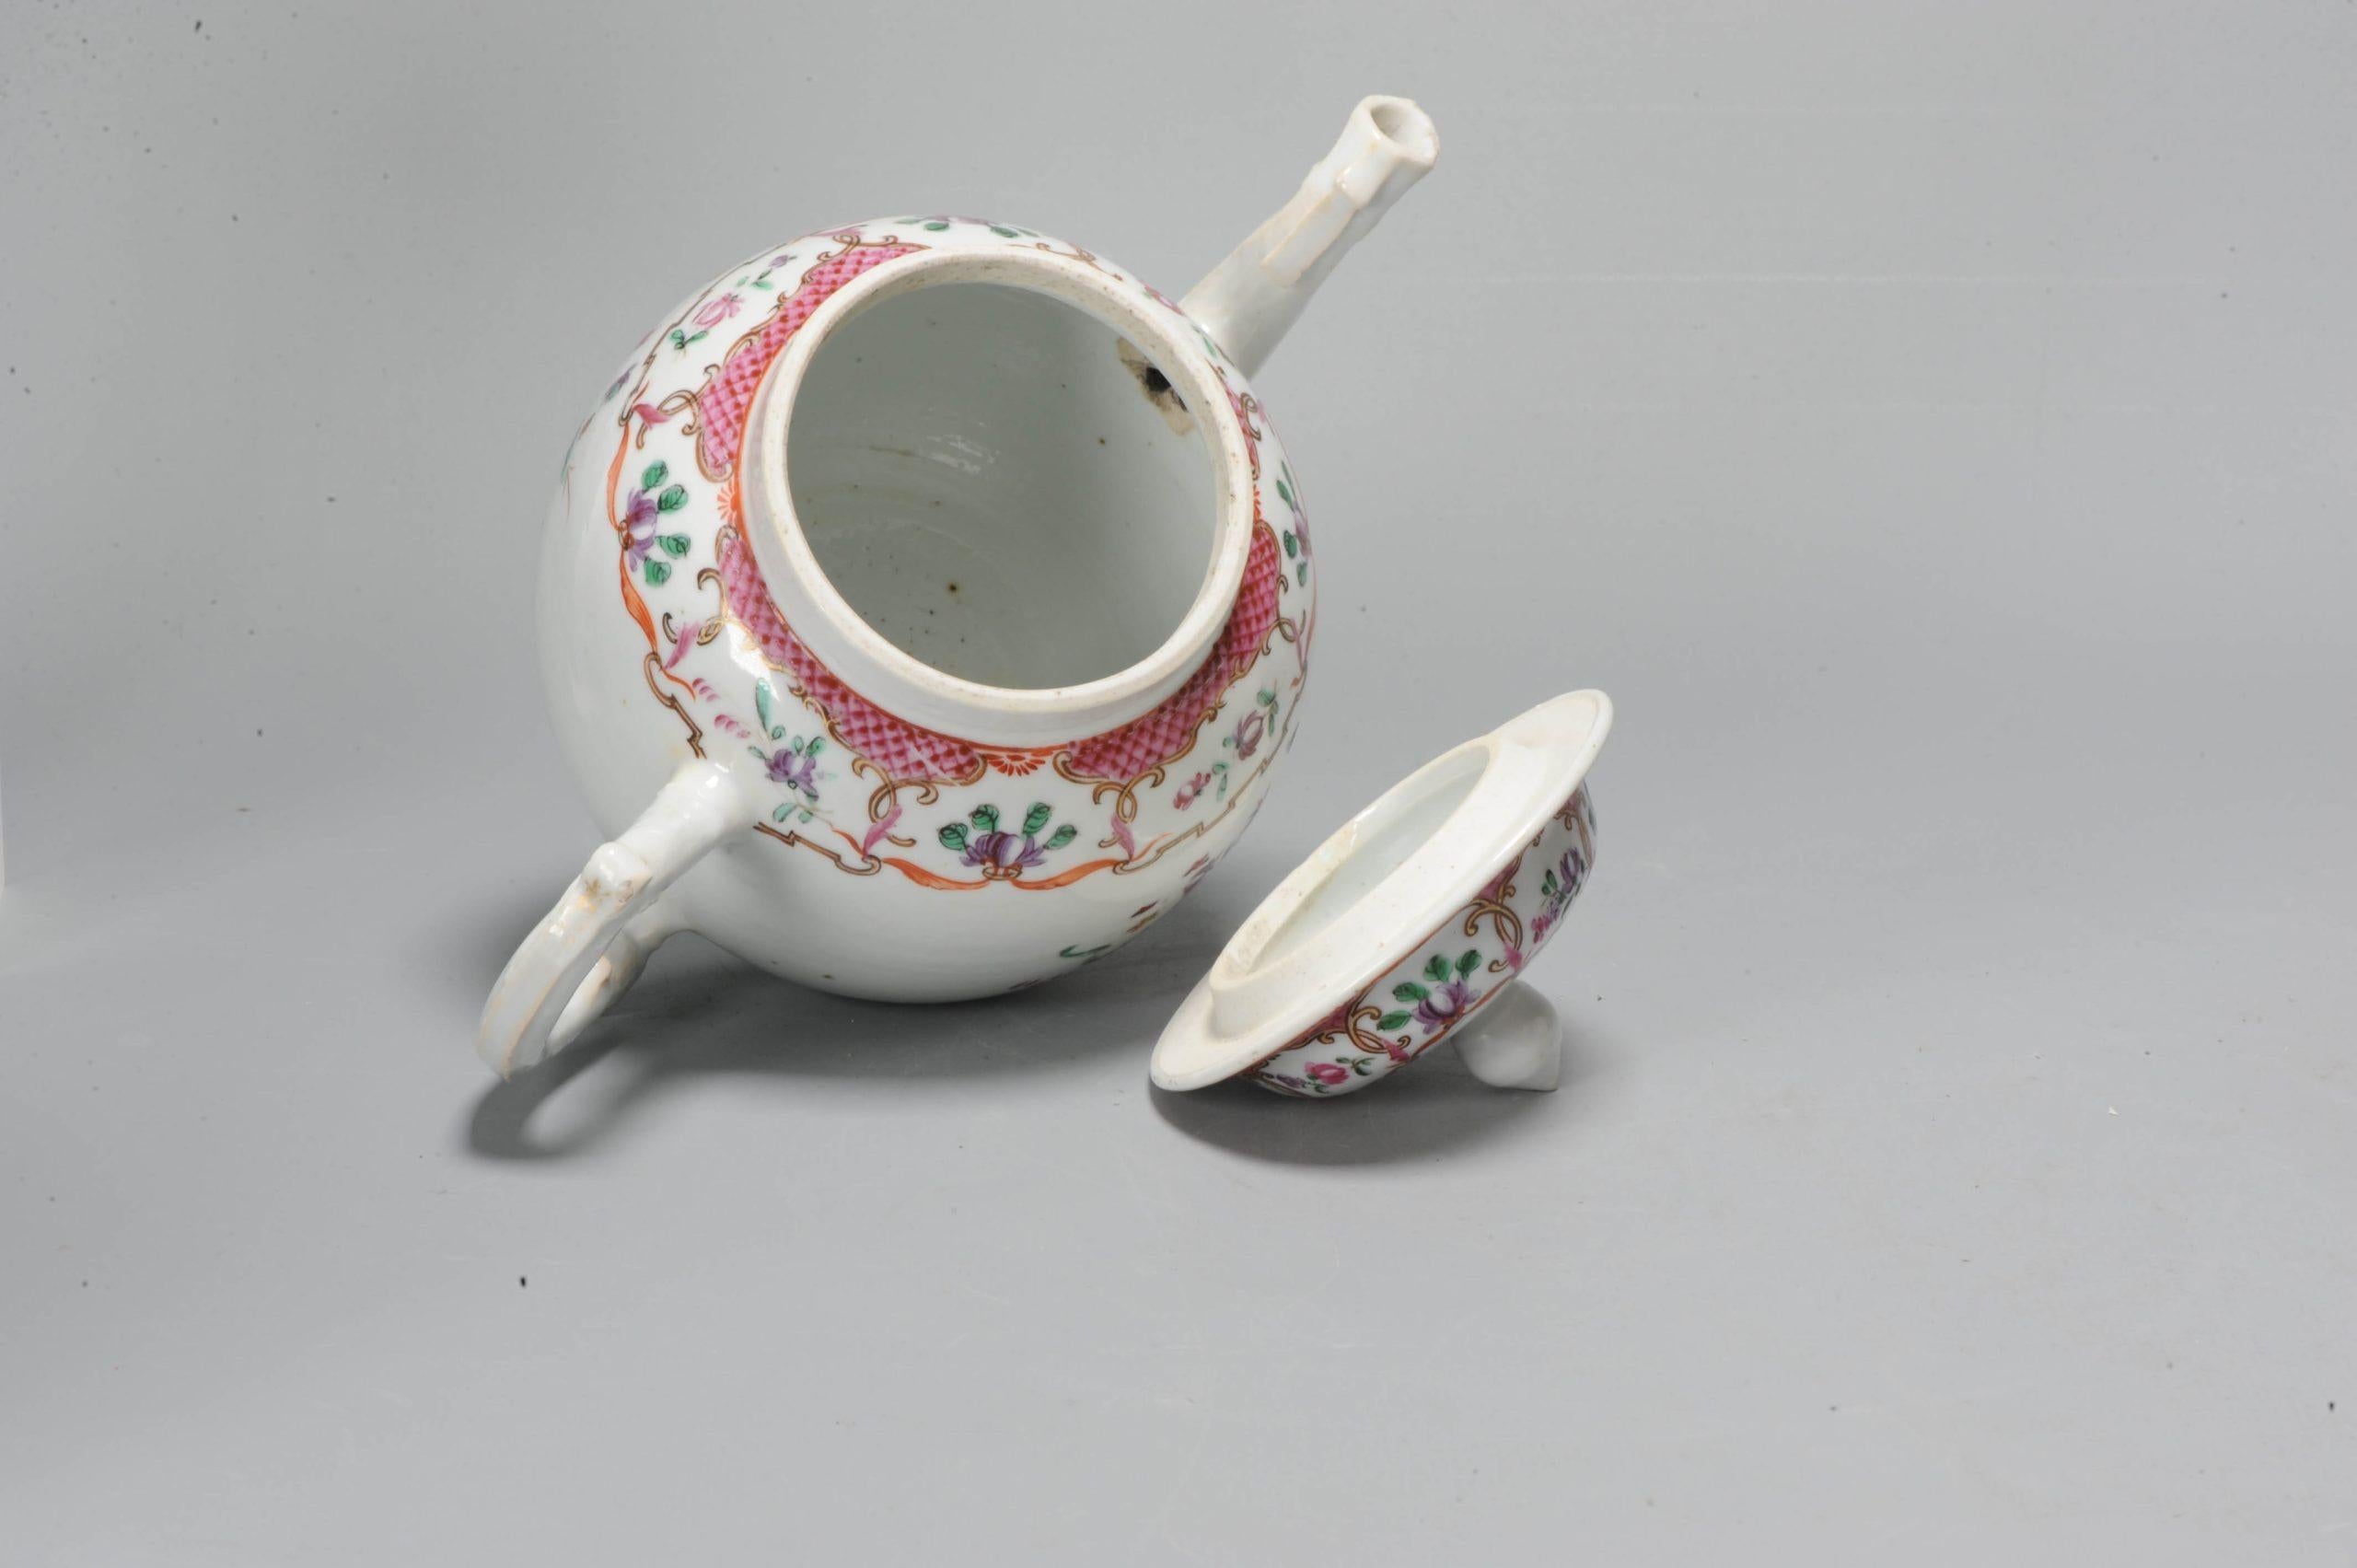 A very nice example of chine de commande porcelain. This pot is of larger size and is finely shaped. With a delicate painting of flowers.

Additional information:
Material: Porcelain & Pottery
Region of Origin: China
Emperor: Qianlong